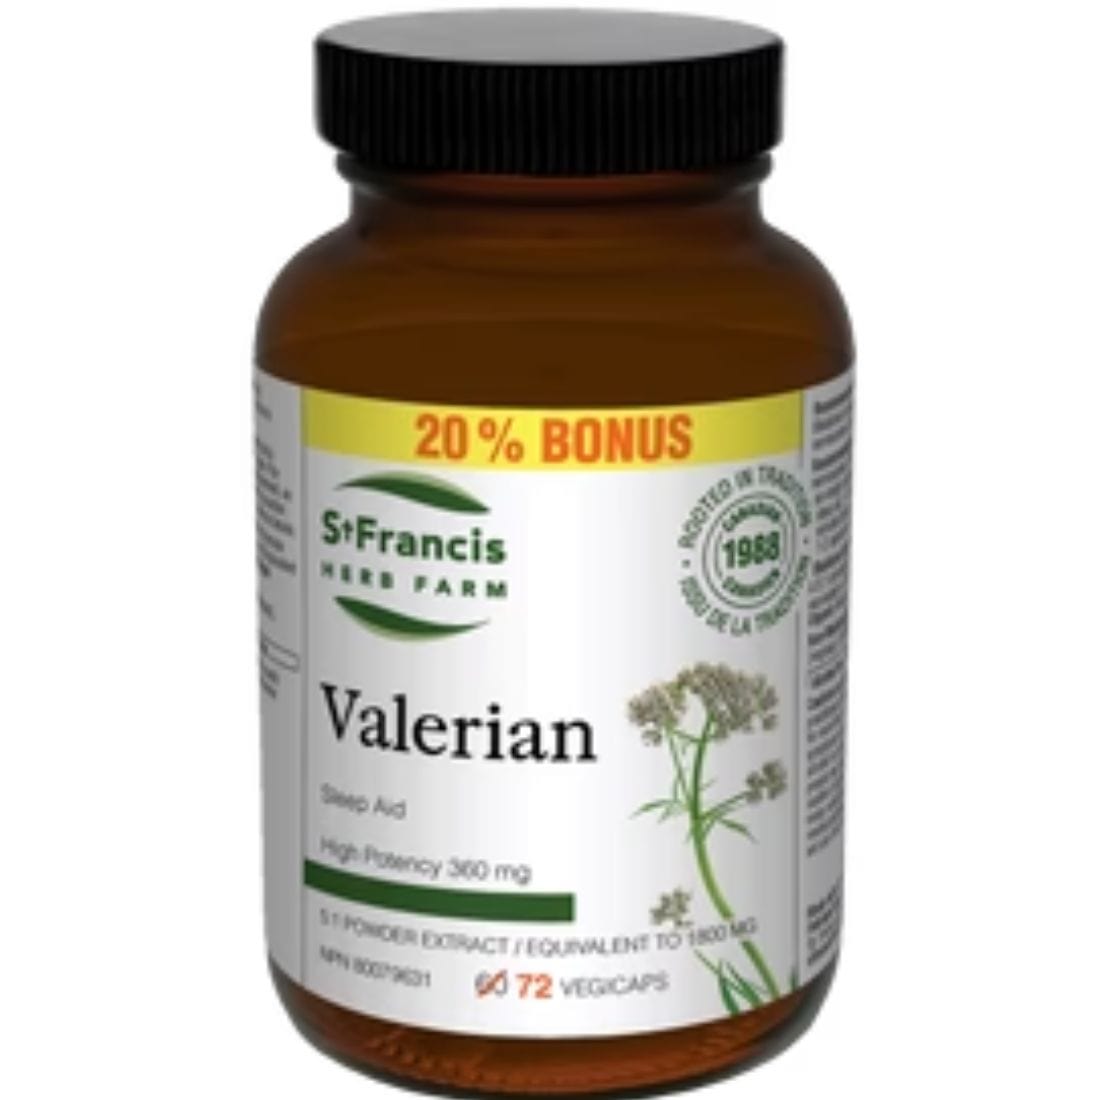 St. Francis Valerian 360mg, High Potency 5:1 Extract, Capsules